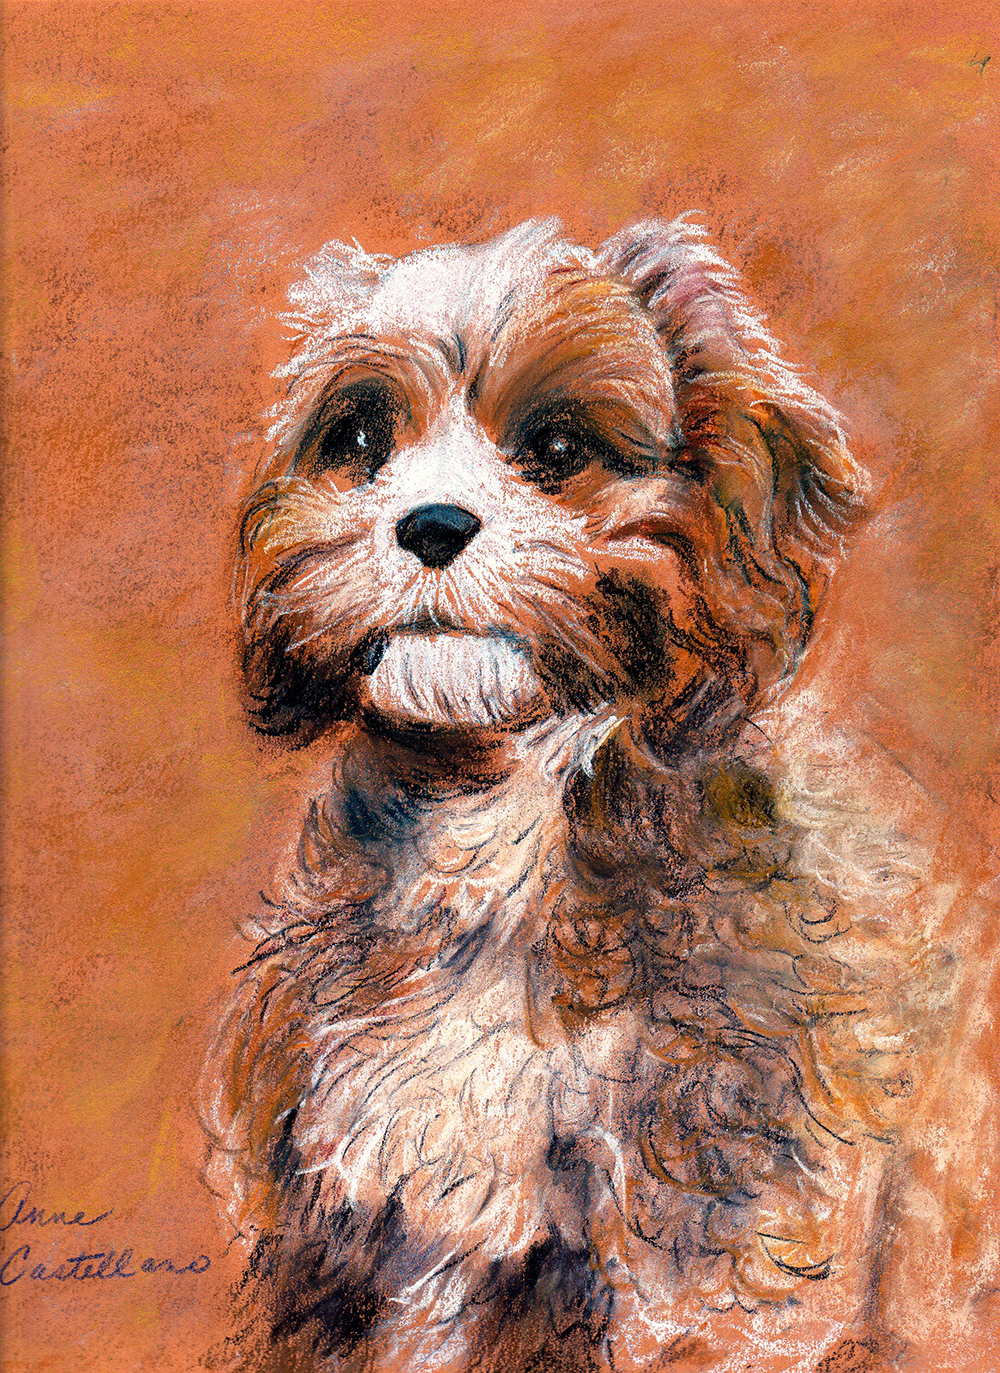 Anne Castellano was awarded First Place for Pastel by a Non-Professional artist for this work, titled “Precious Pup.” It is a portrait of a beloved dog who sits calmly, facing the viewer. The long-haired dog has an engaging face. This pastel portrait is done entirely in shades of black, white and lots of earthy reddish-sanguine brown (possibly using conte crayons). It is skillfully drawn with detailed strokes defining the dog’s curly hair. The dog resembles a terrier-schnauzer mix: curly hair—lighter around the forehead, nose and chest area. A black nose. Gentle, black eyes. The background is solid reddish-sanguine brown, contrasting with the lines that defining the curly hair.